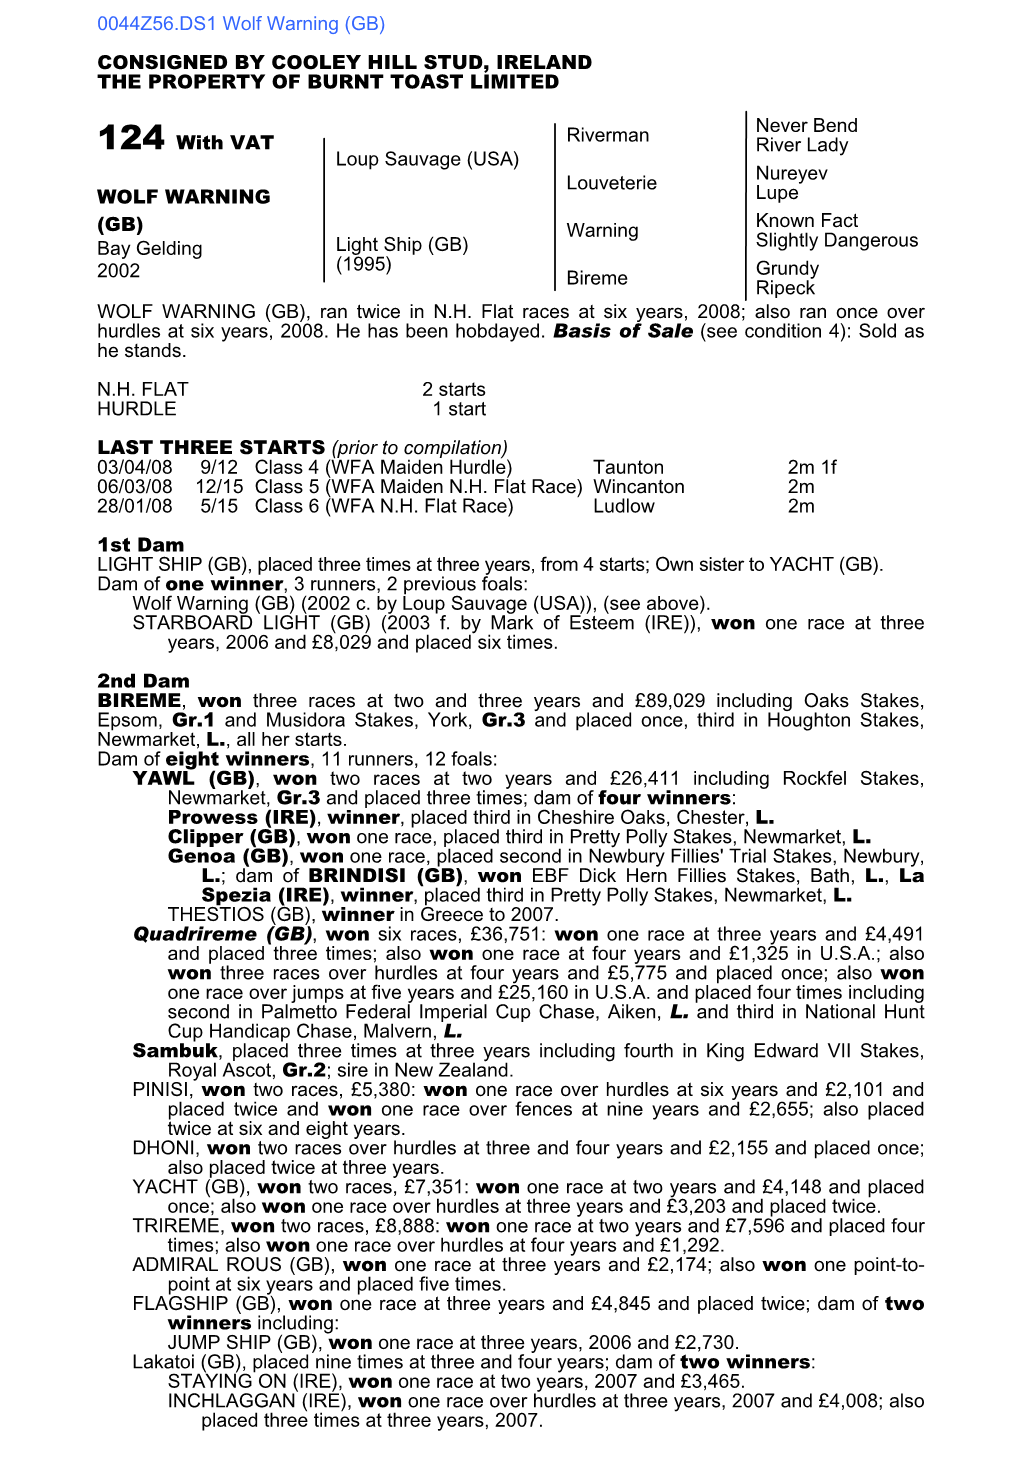 0044Z56.DS1 Wolf Warning (GB) CONSIGNED by COOLEY HILL